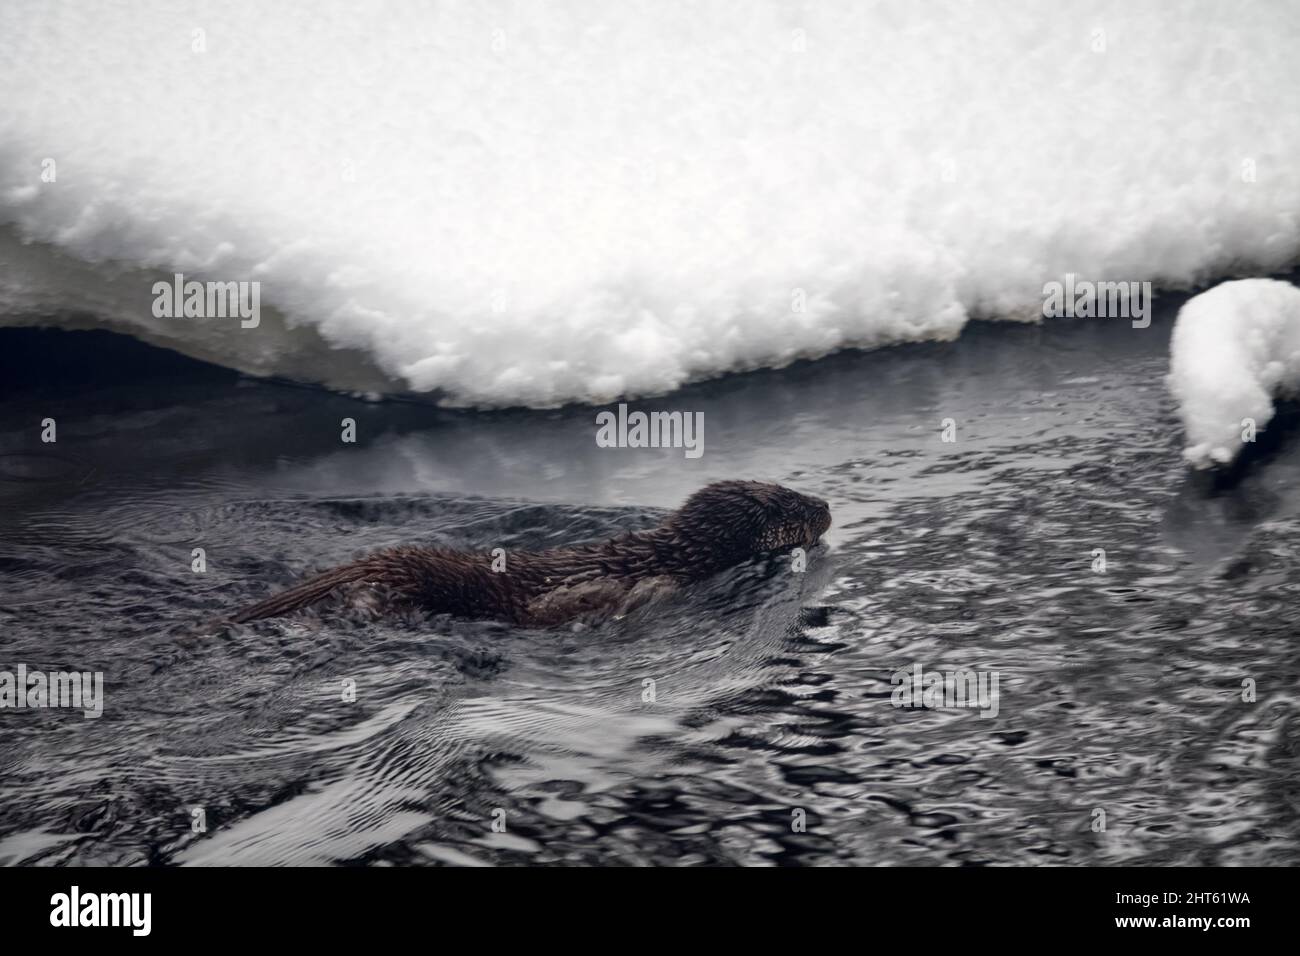 A young otter on the freezing northern river. Prefers rivers with pools, whirls, rapids that do not freeze in winter. In winter, otters leave their fa Stock Photo